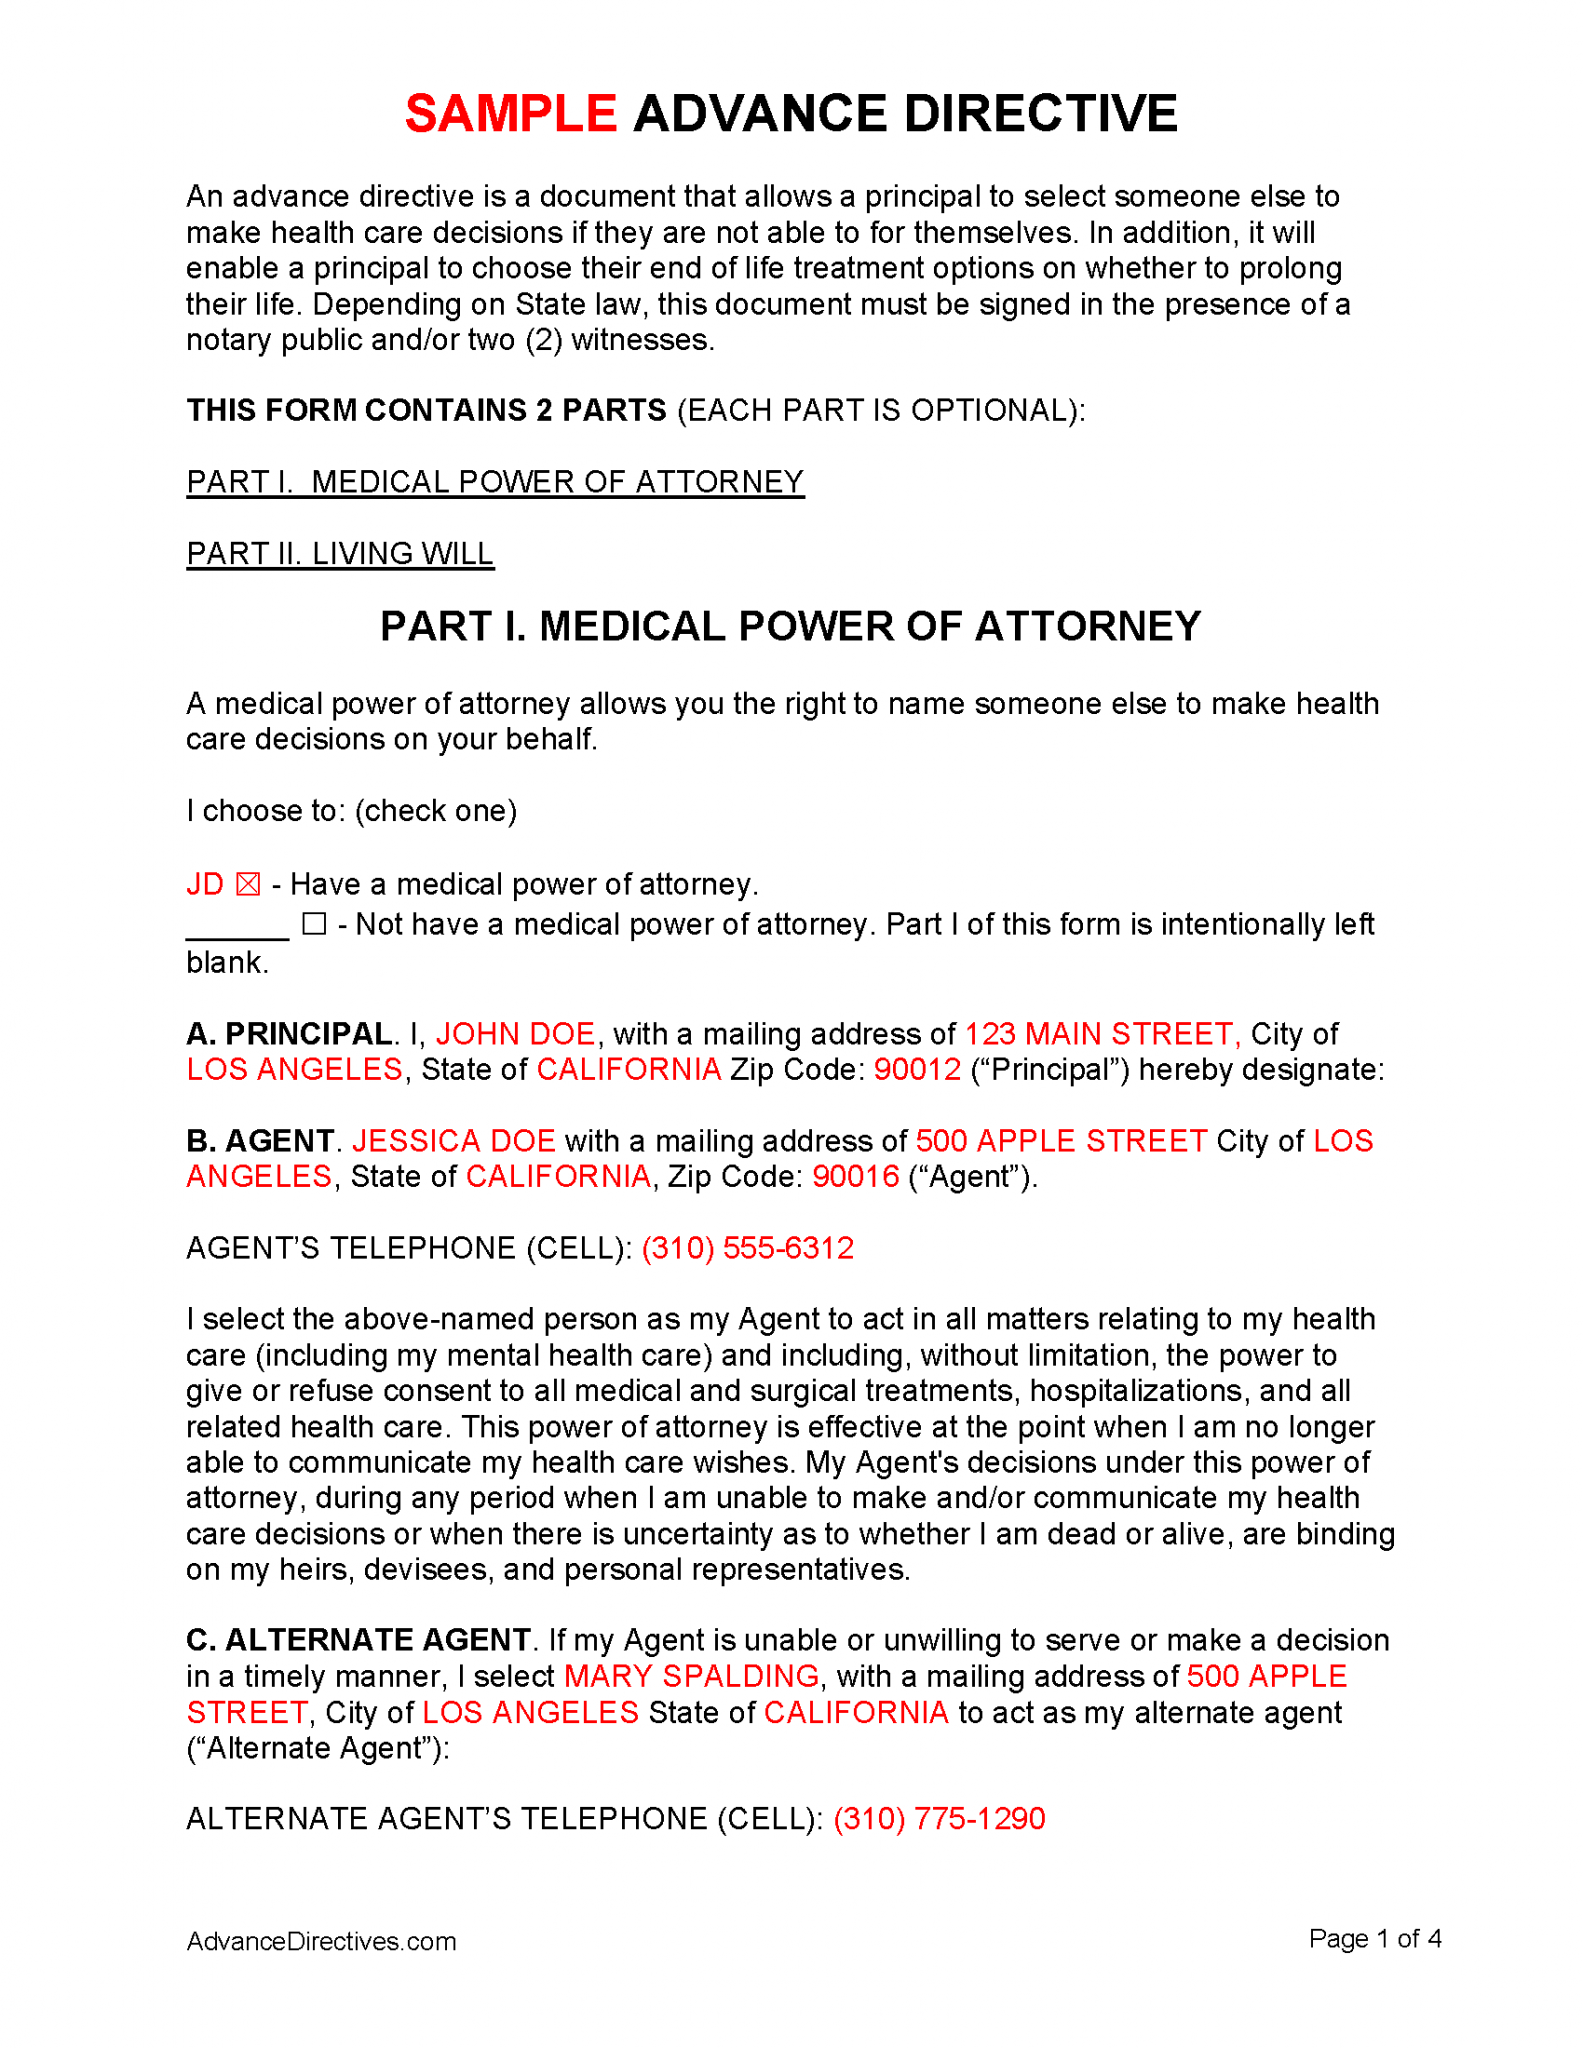 free-advance-directive-forms-50-states-pdf-word